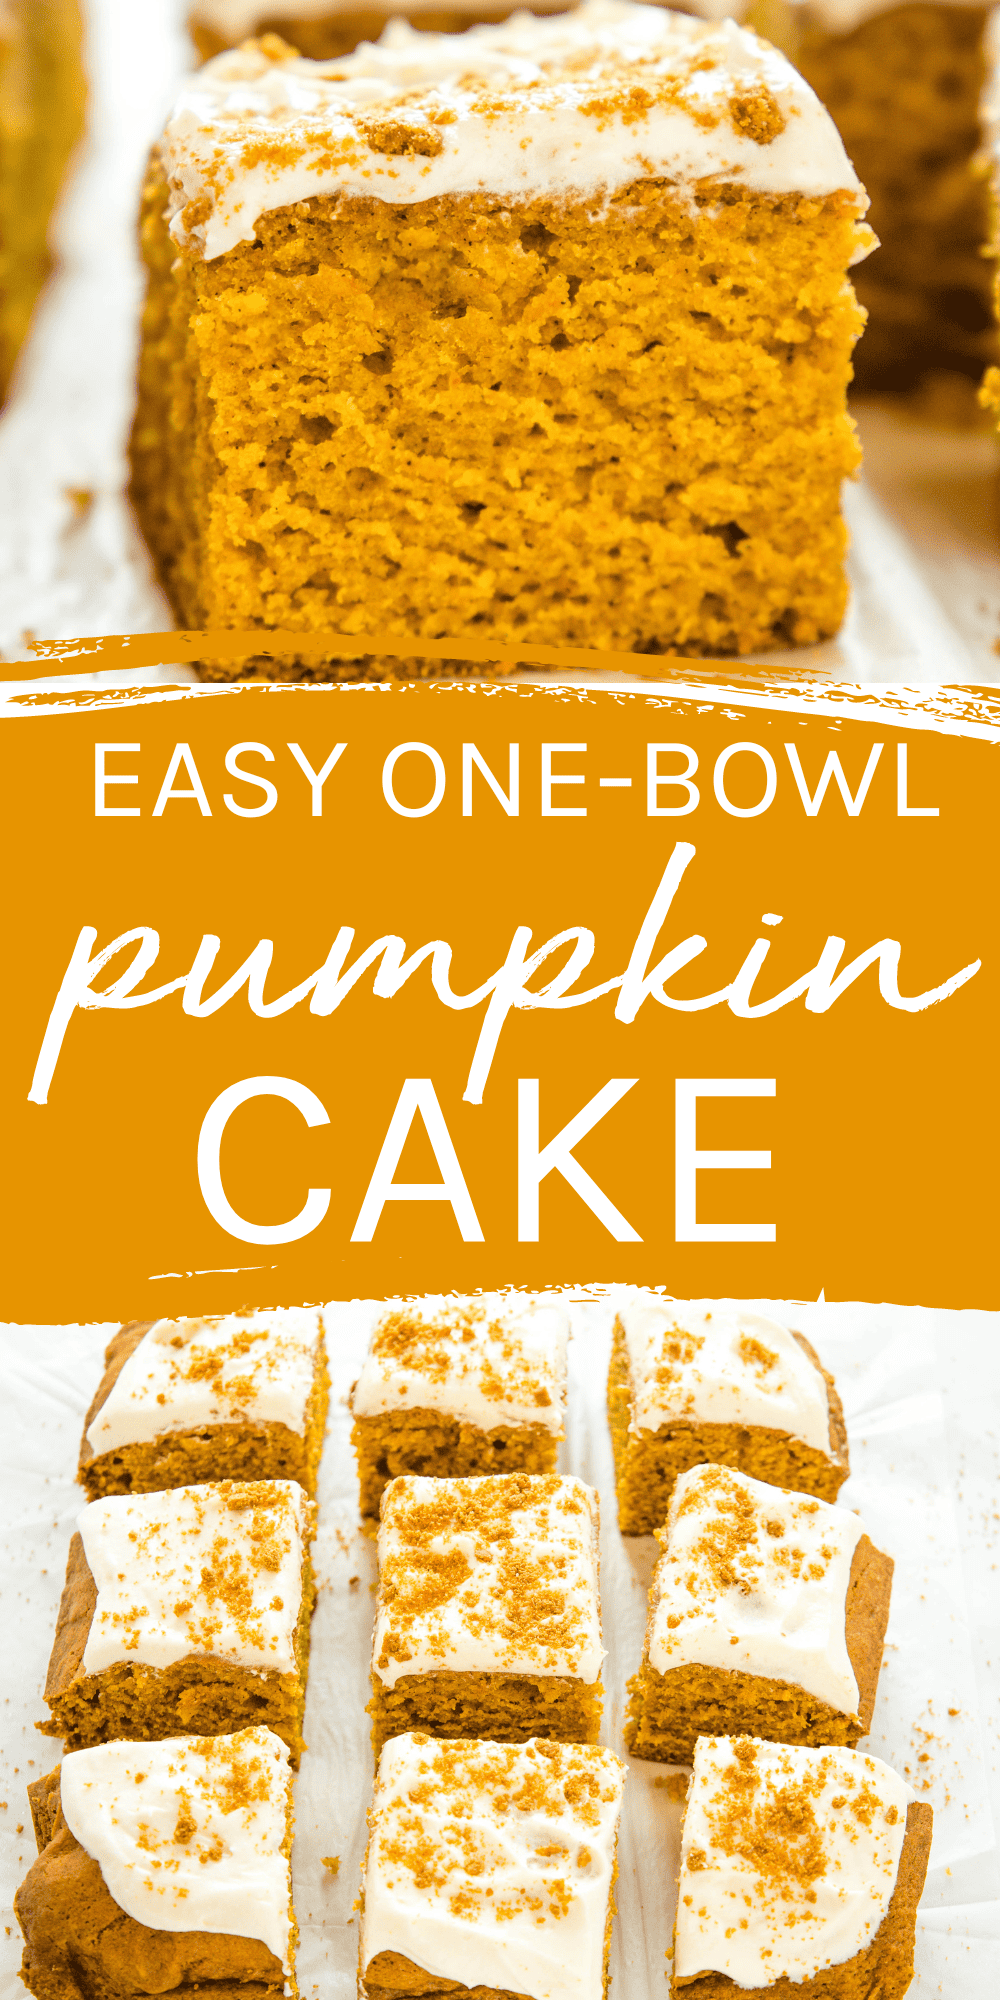 This Easy Pumpkin Cake recipe is an easy-to-make one bowl pumpkin cake that's tender, moist & topped with a simple cream cheese frosting! Recipe from thebusybaker.ca! #pumpkincake #easypumpkincake #pumpkincakewithcreamcheesefrosting #pumpkincakerecipe via @busybakerblog